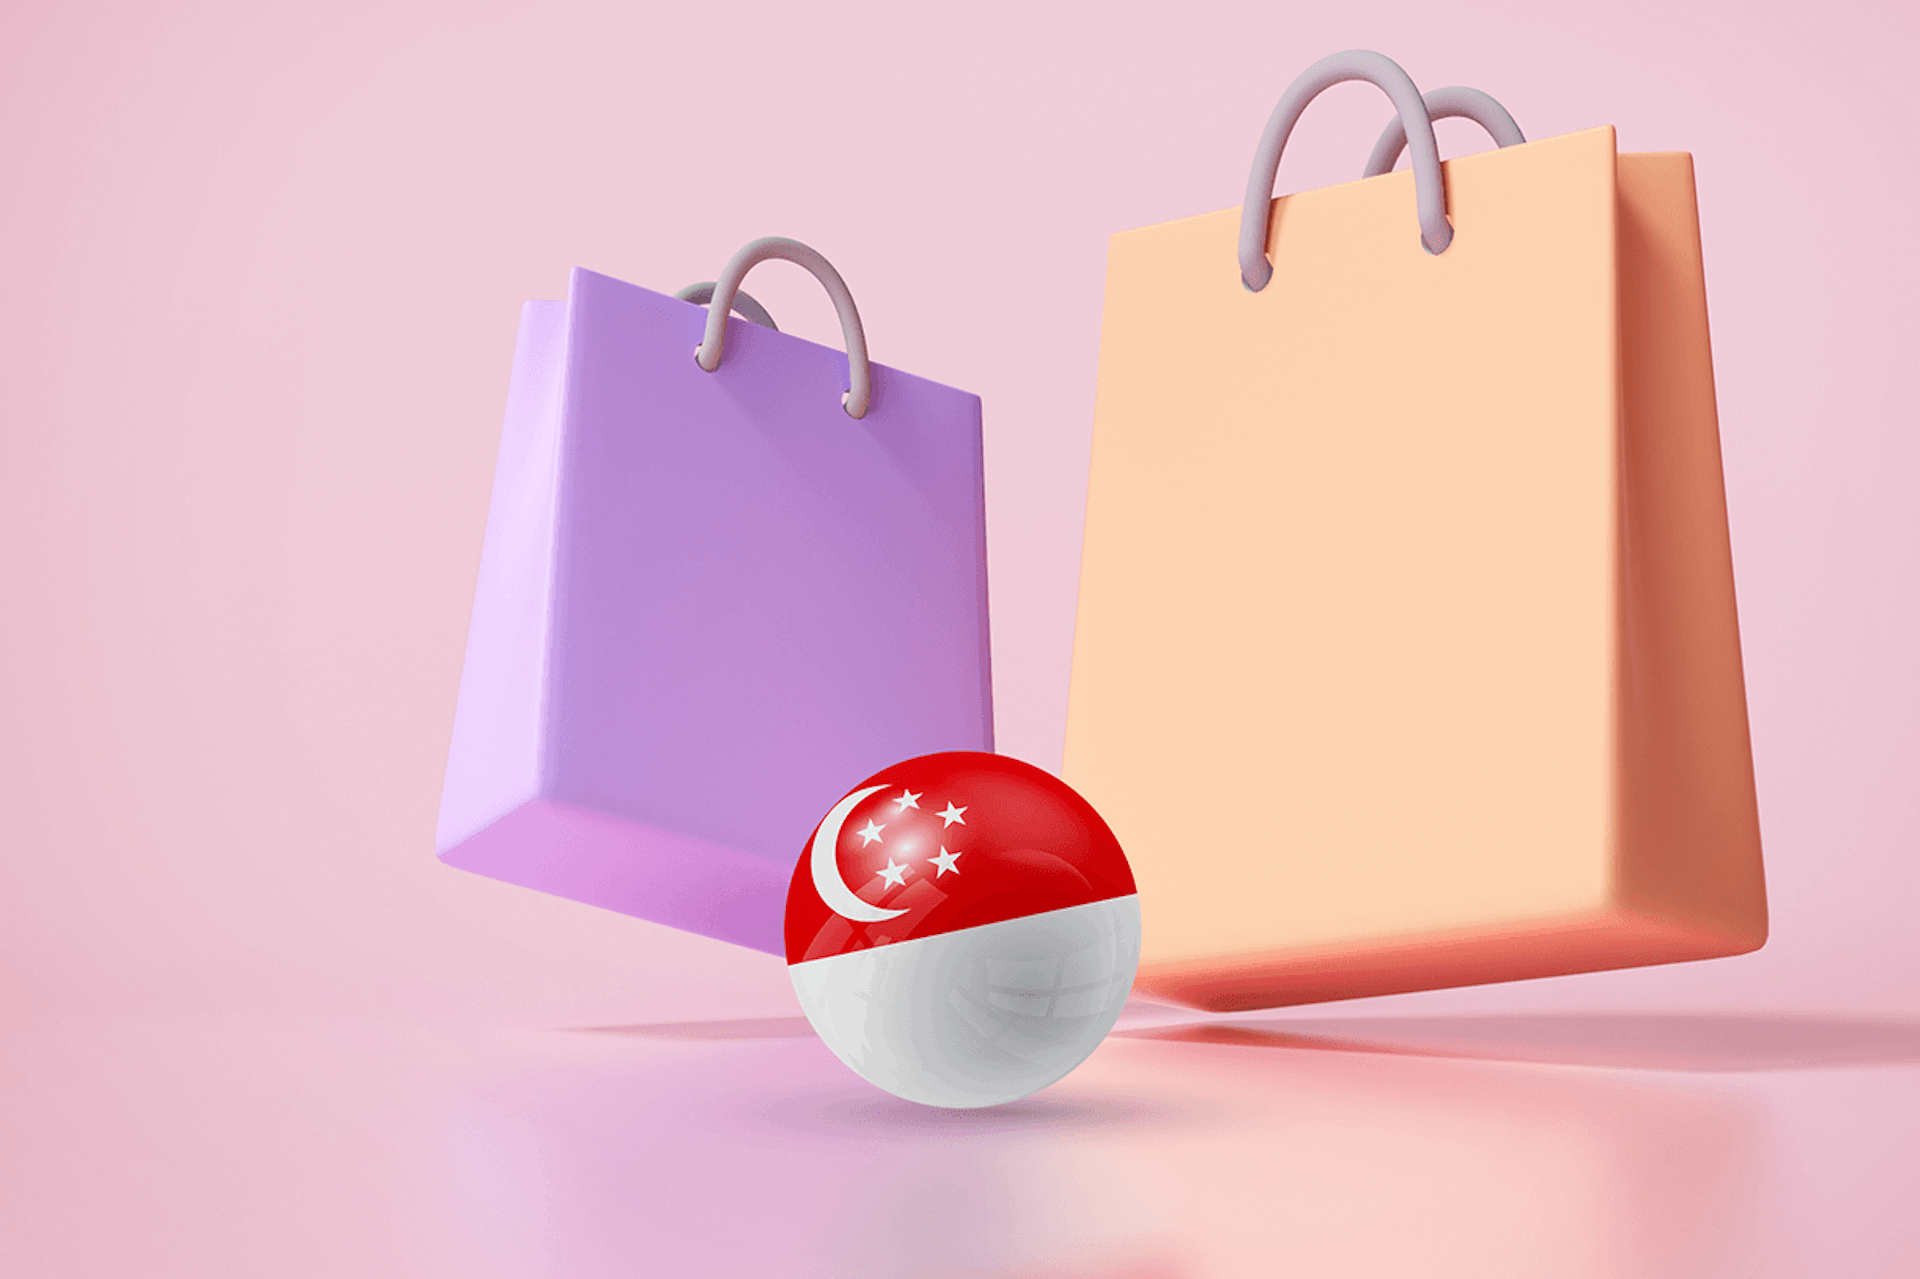 3D image of shopping bags with the Singaporean flag showcasing the top fashion influencers in Singapore